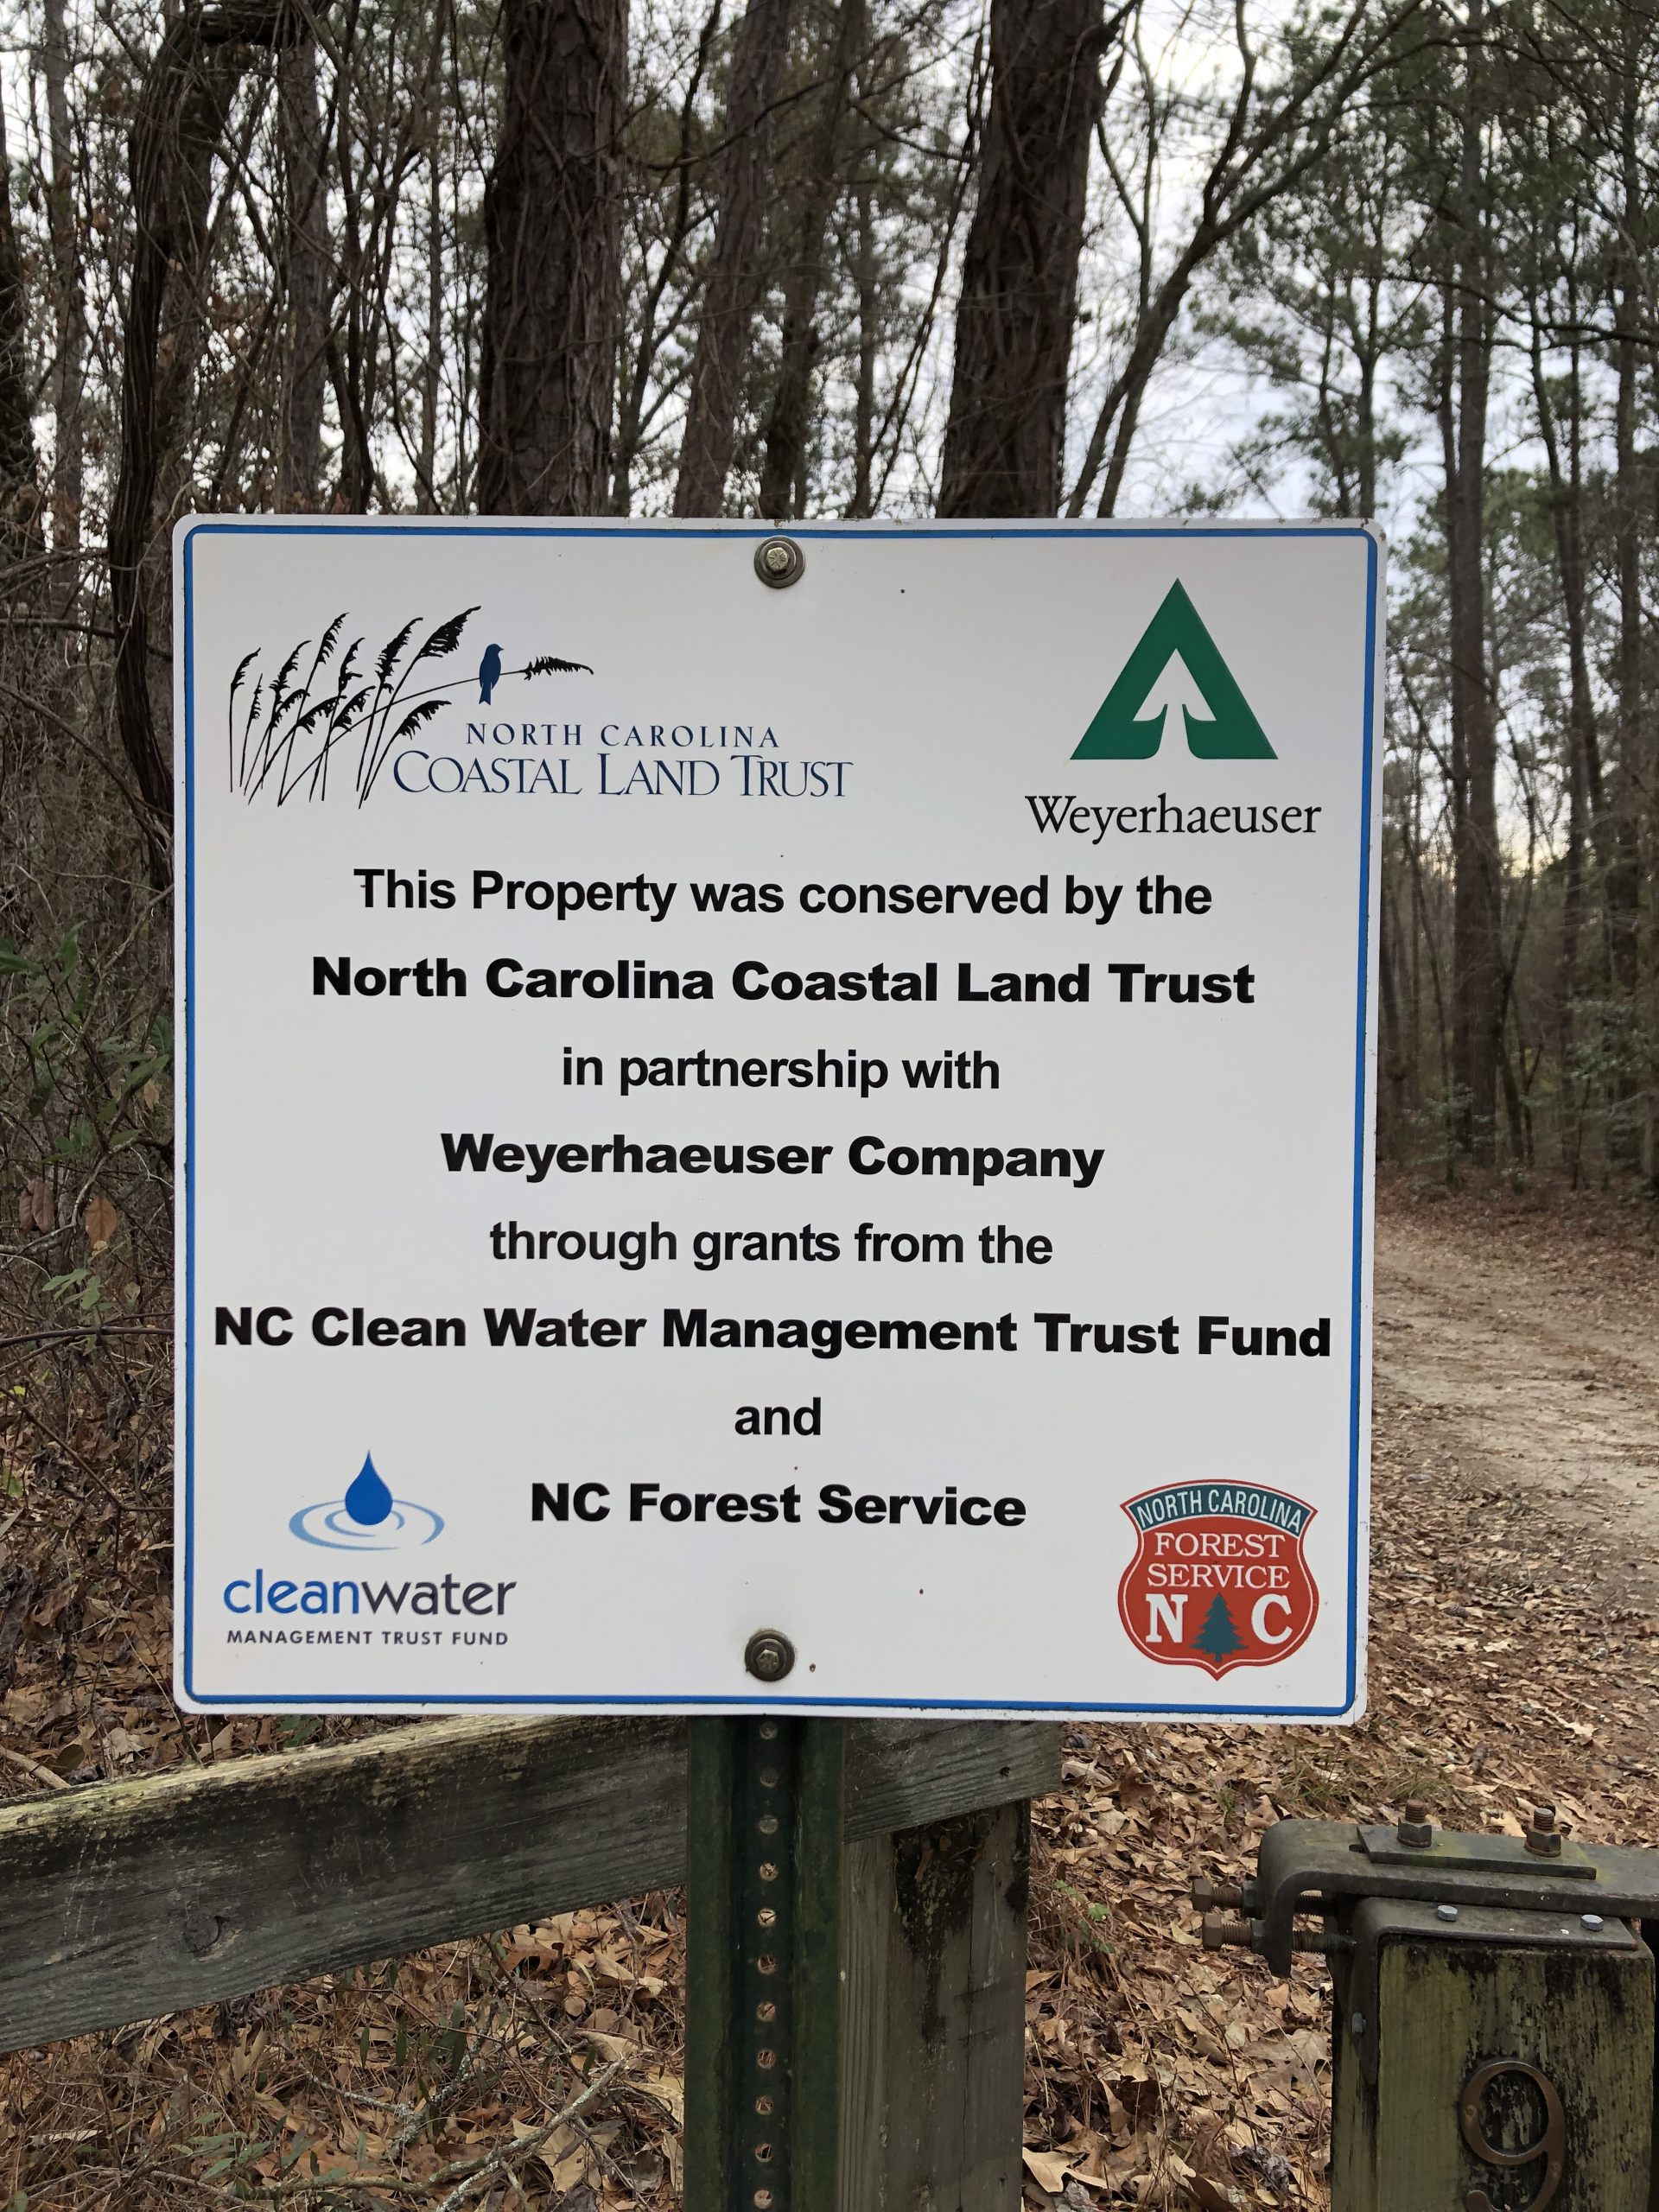 Image of a sign acknowledging the partnership between the North Carolina Coastal Land Trust and Weyerhaeuser.